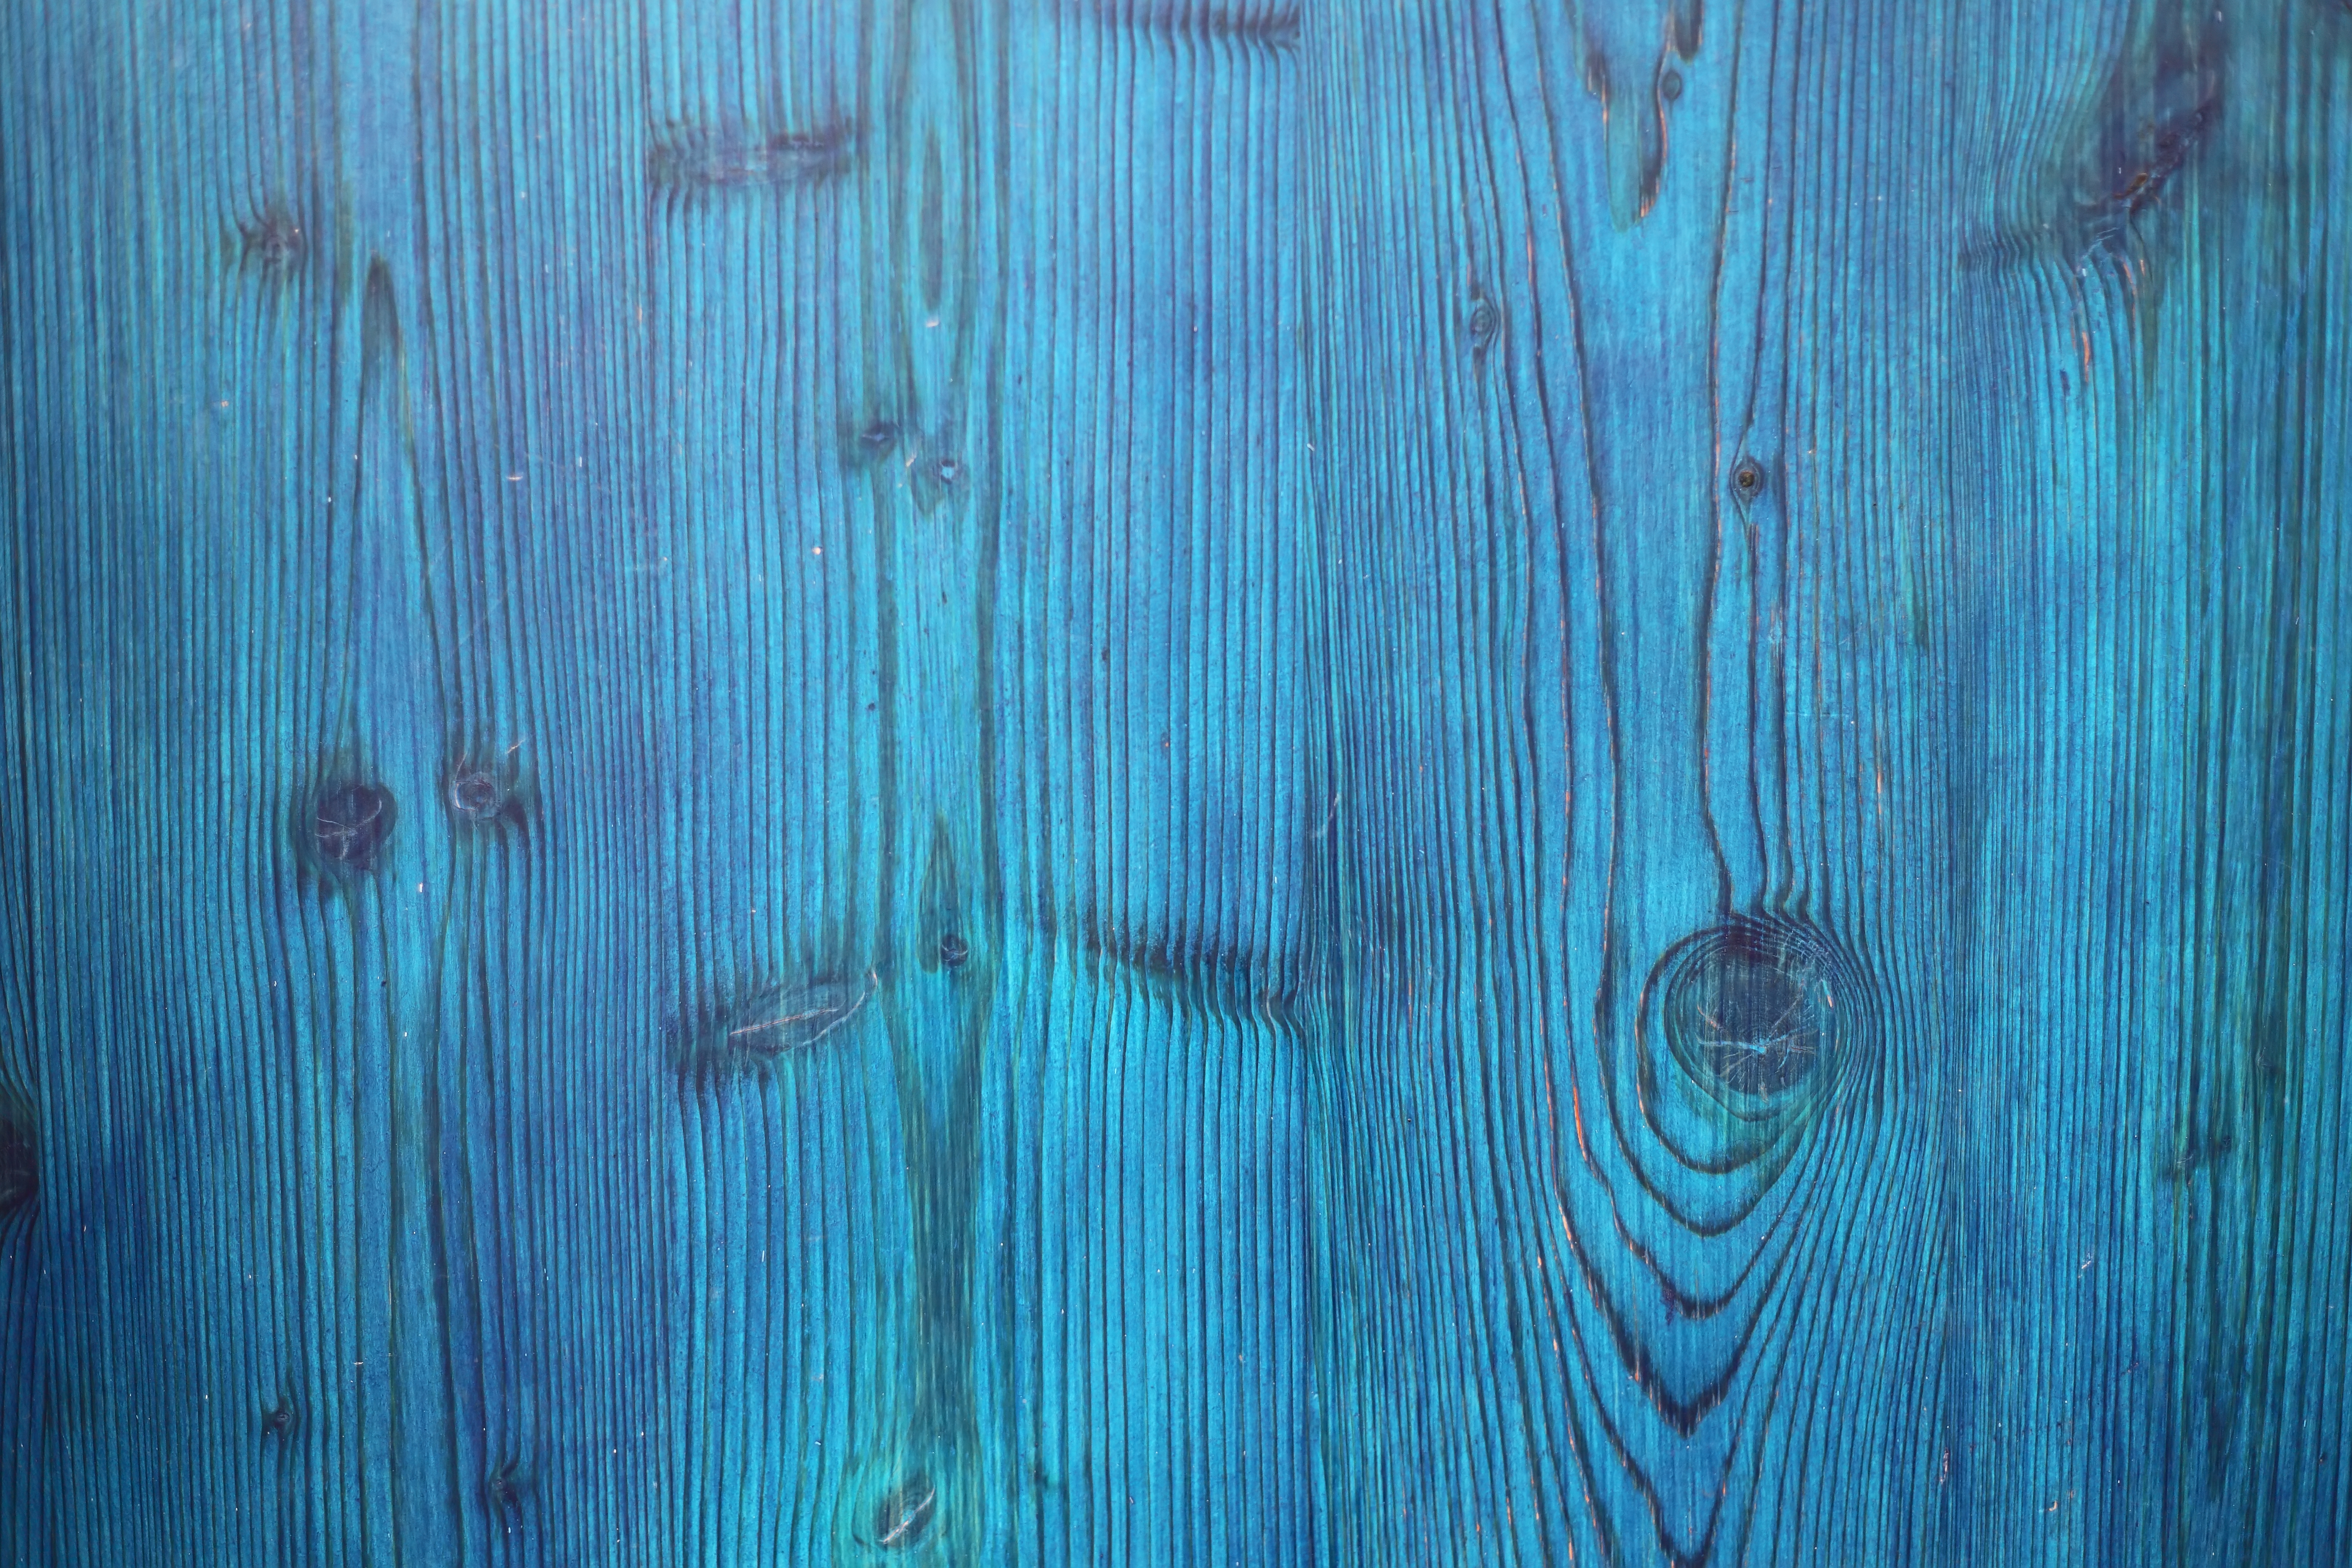 textures, planks, board, blue, wood, wooden, tree, texture, surface cell phone wallpapers